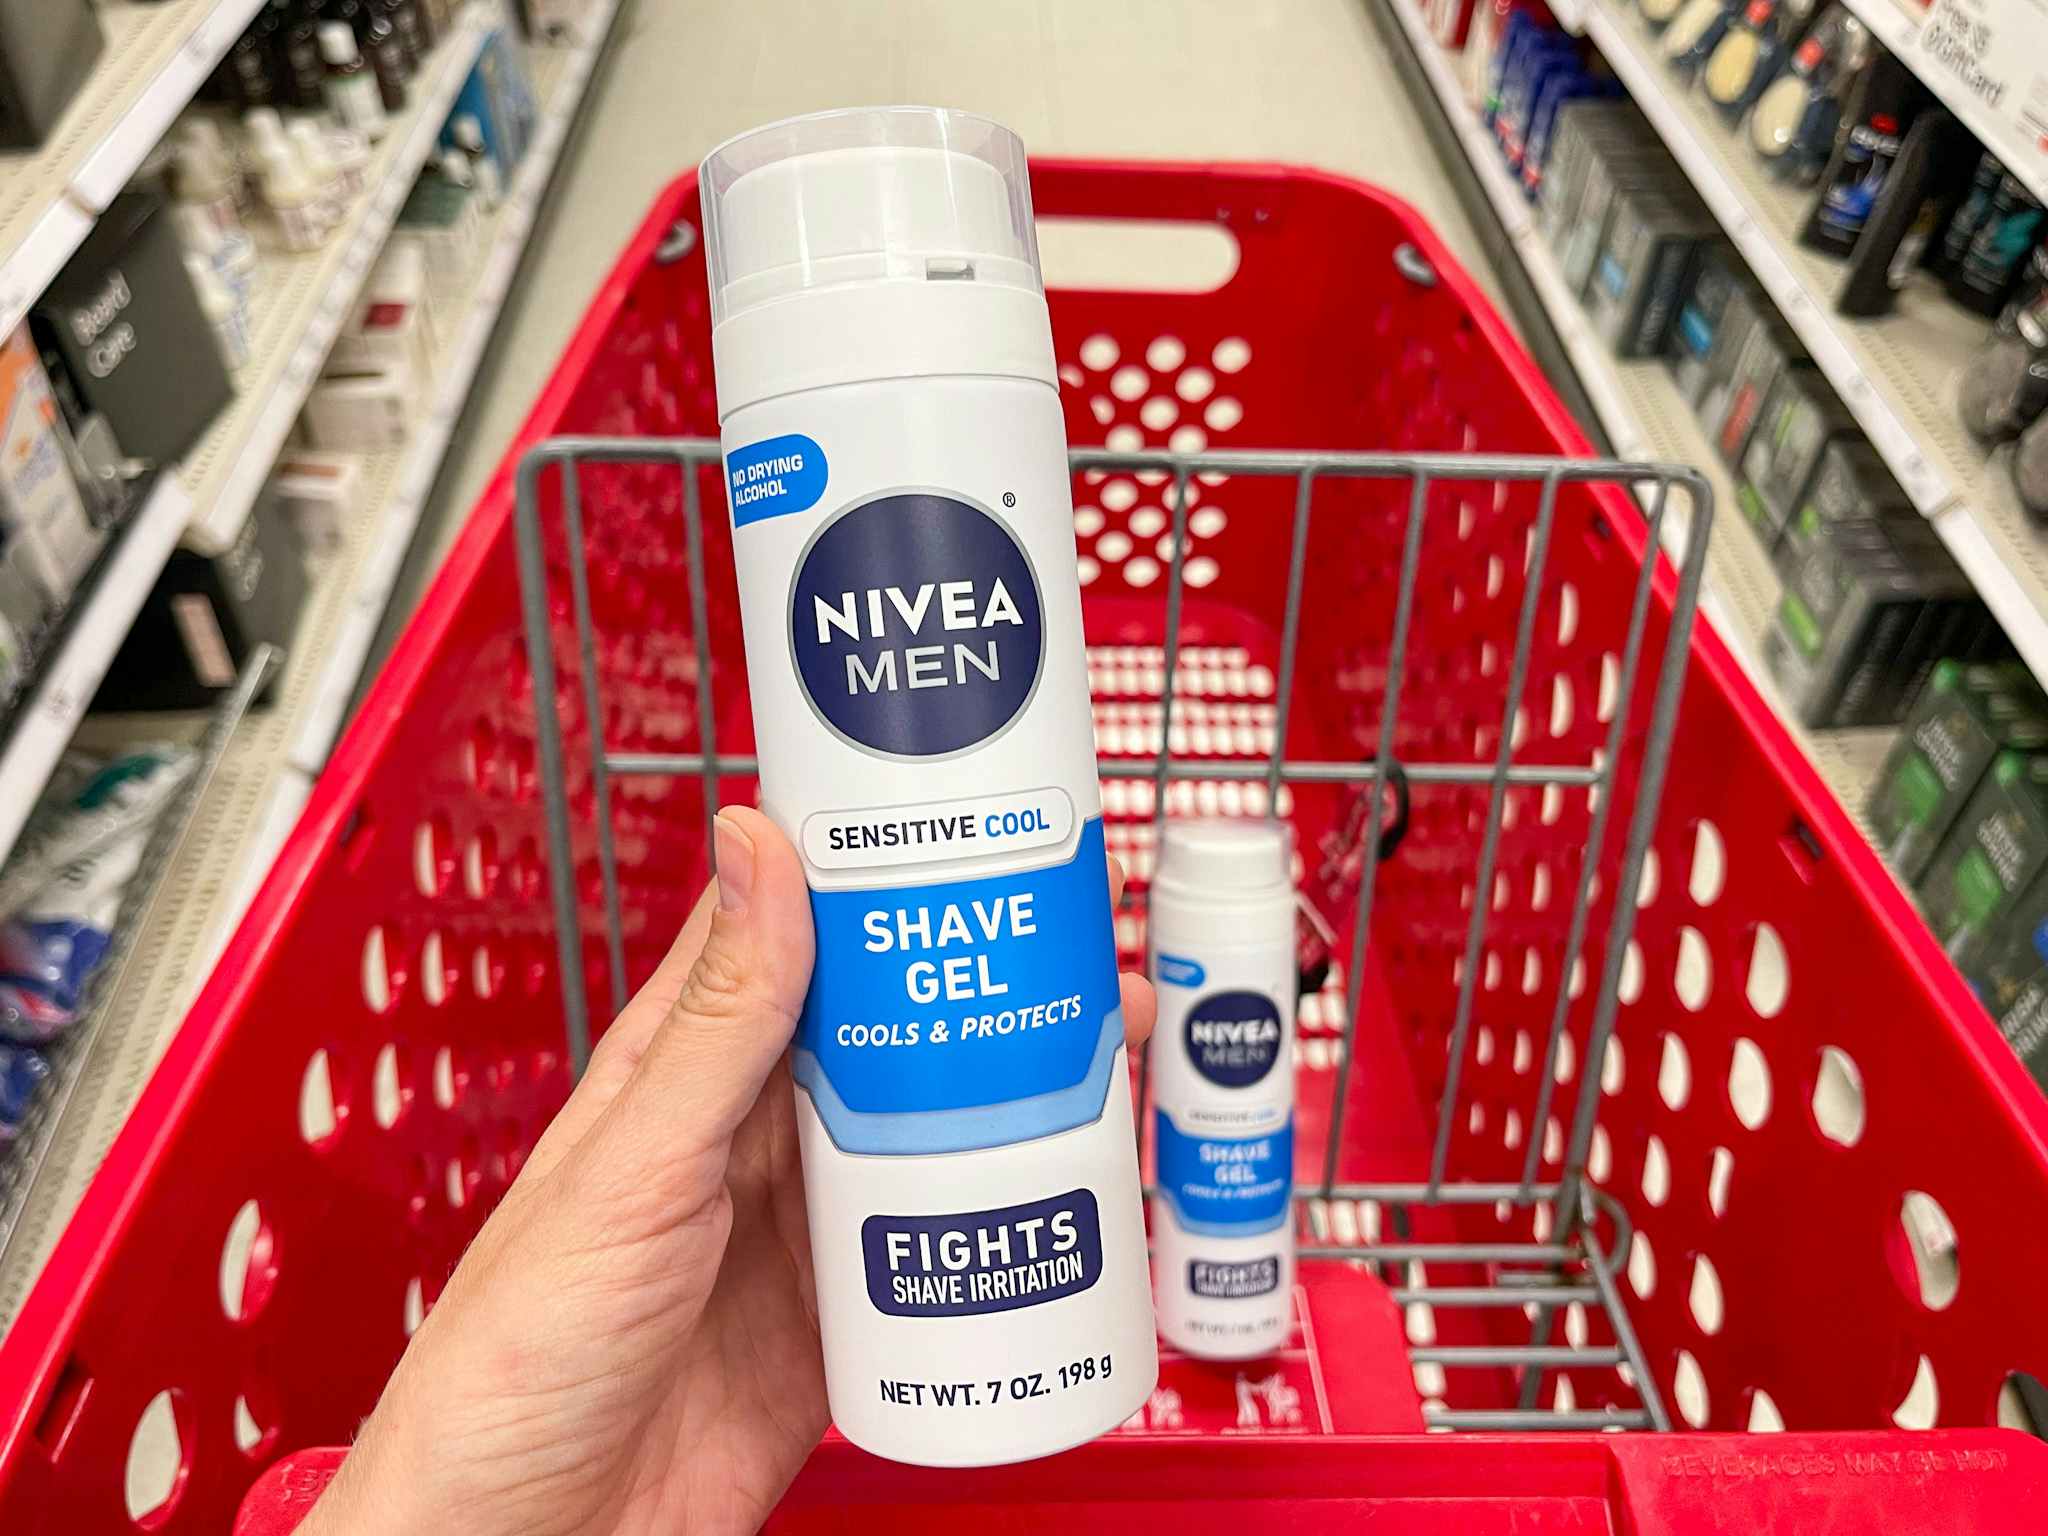 A can of Nivea Men sensitive cool shave gel held out in front of a shopping cart with another Nivea men sensitive cool shave cream.